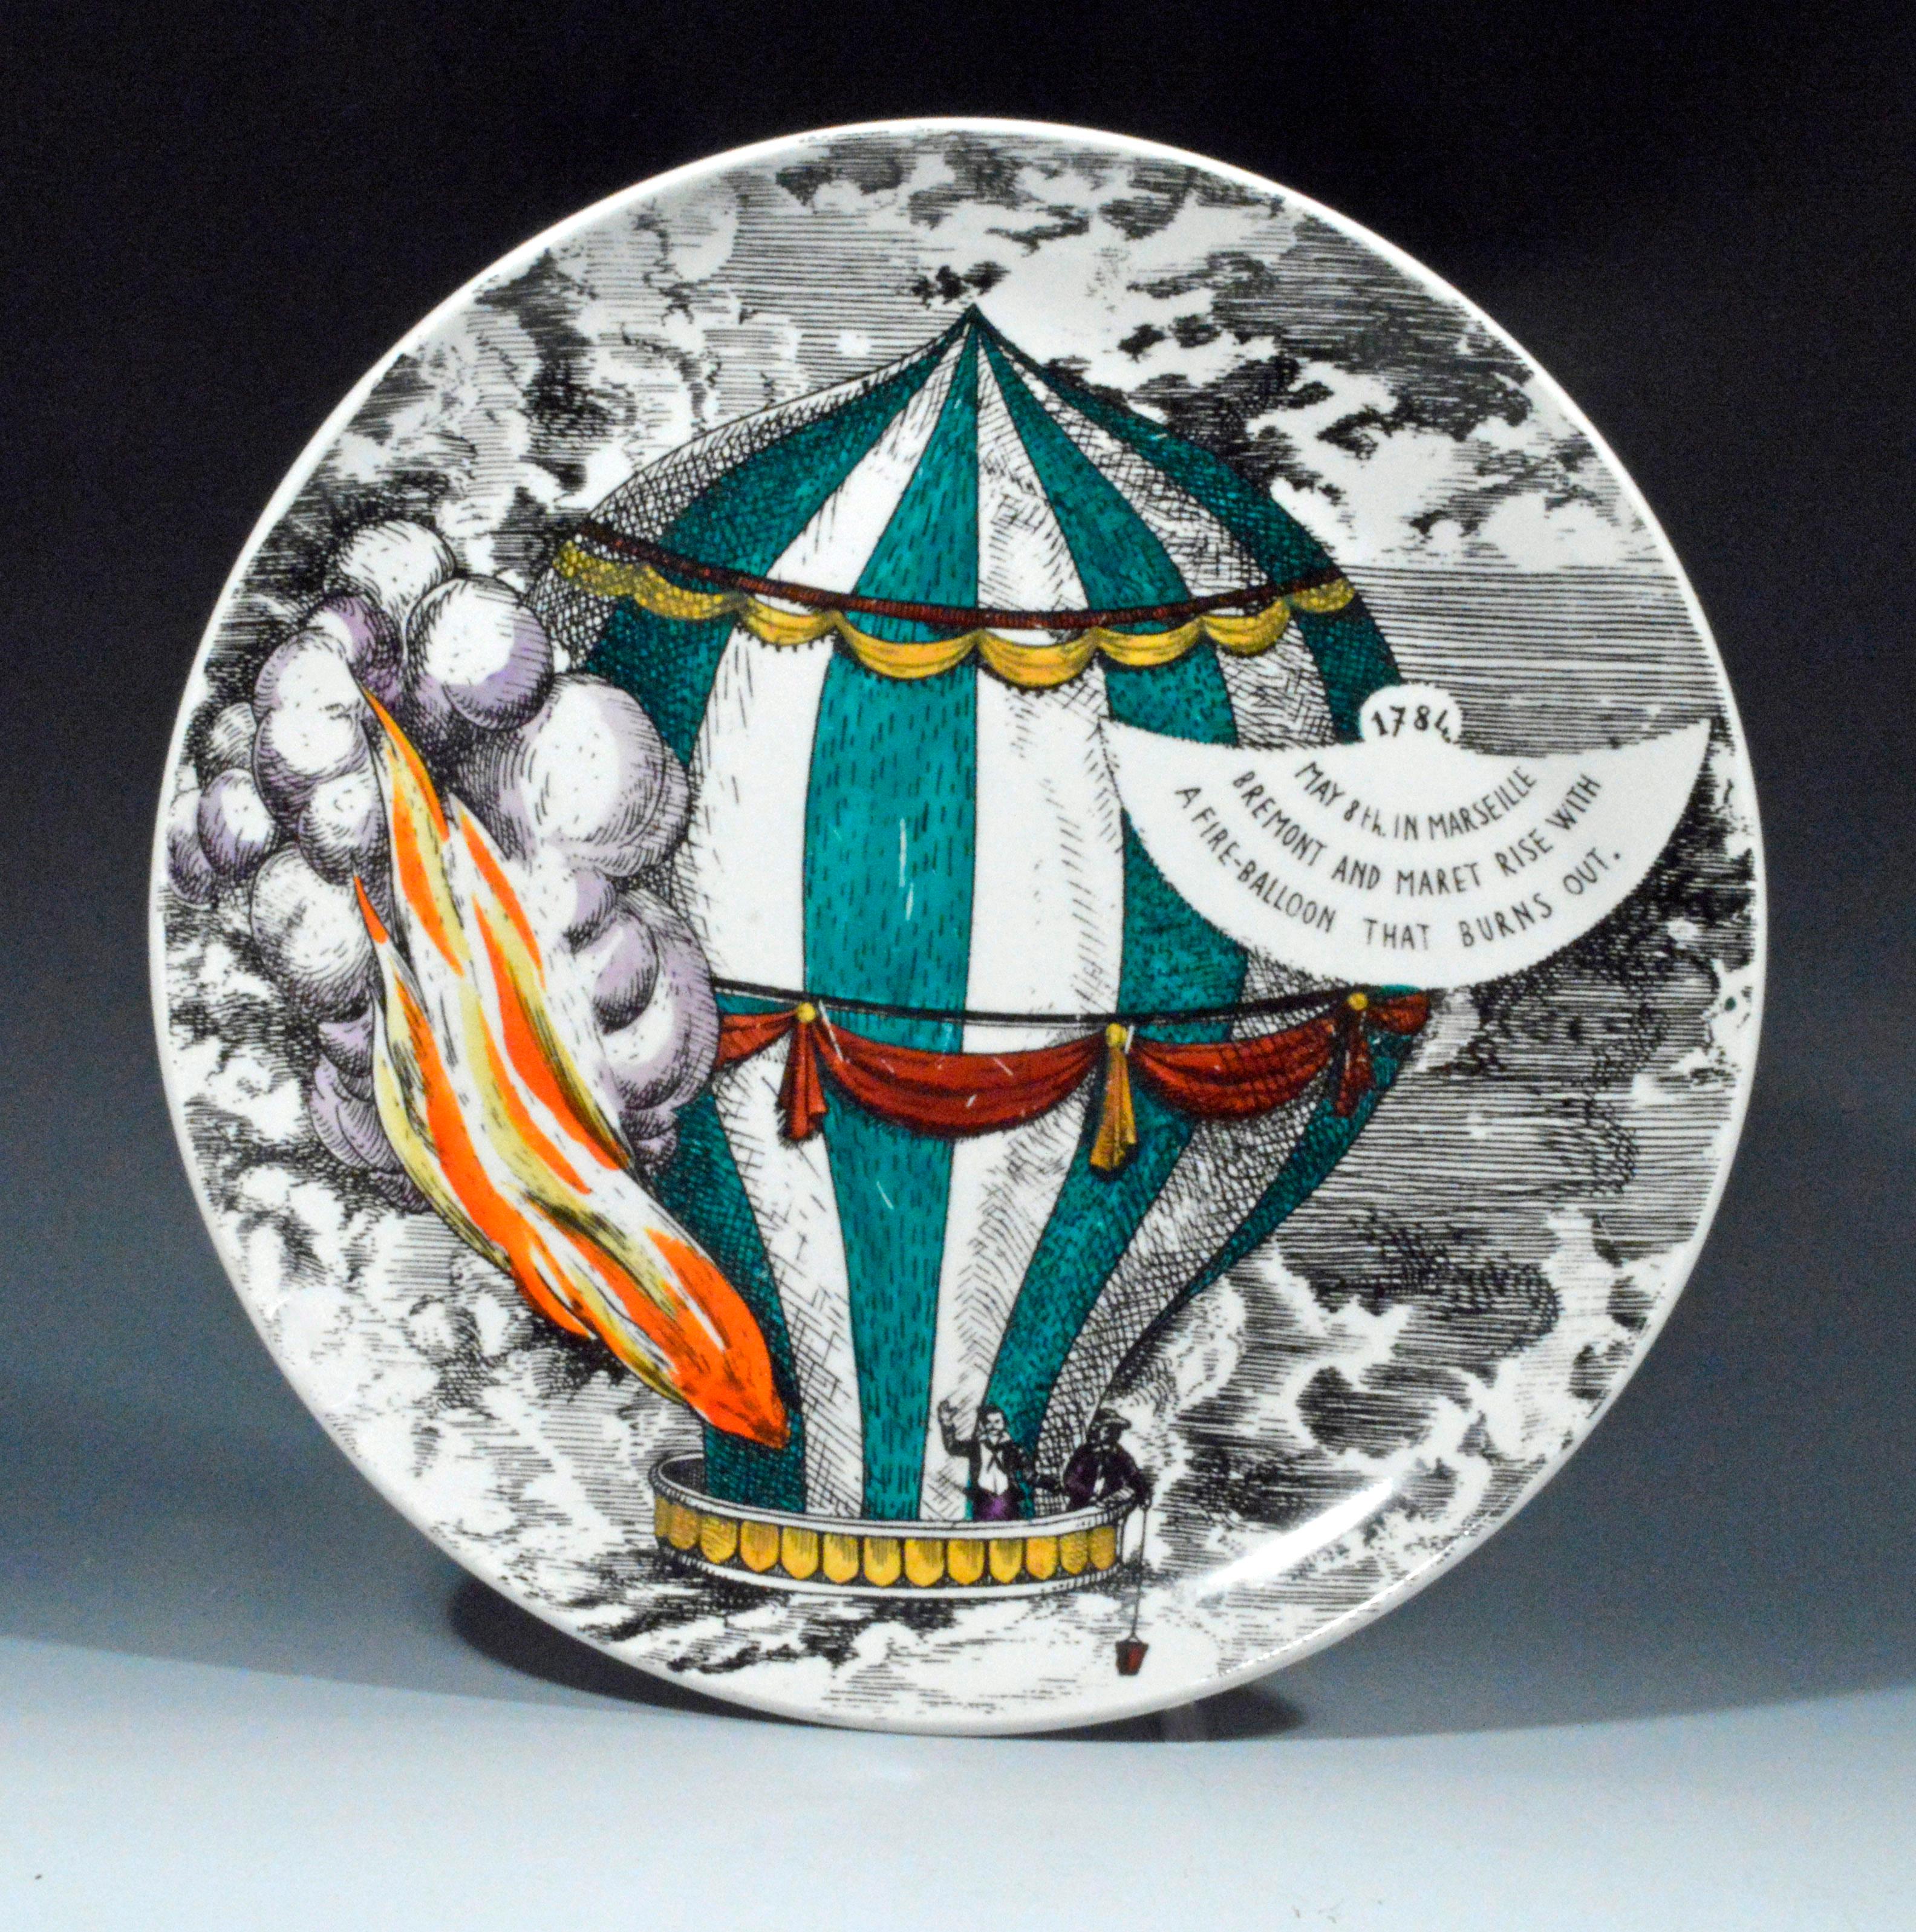 Eight Vintage Piero Fornasetti Plates, 
Mongolfiere (hot air) Design,
1950's

The large Piero Fornasetti plate depicts a large hot air balloon with a panel describing the image.  

1804
Dec. 16th. Fire Balloon for
Napoleon's Incornation. Soared